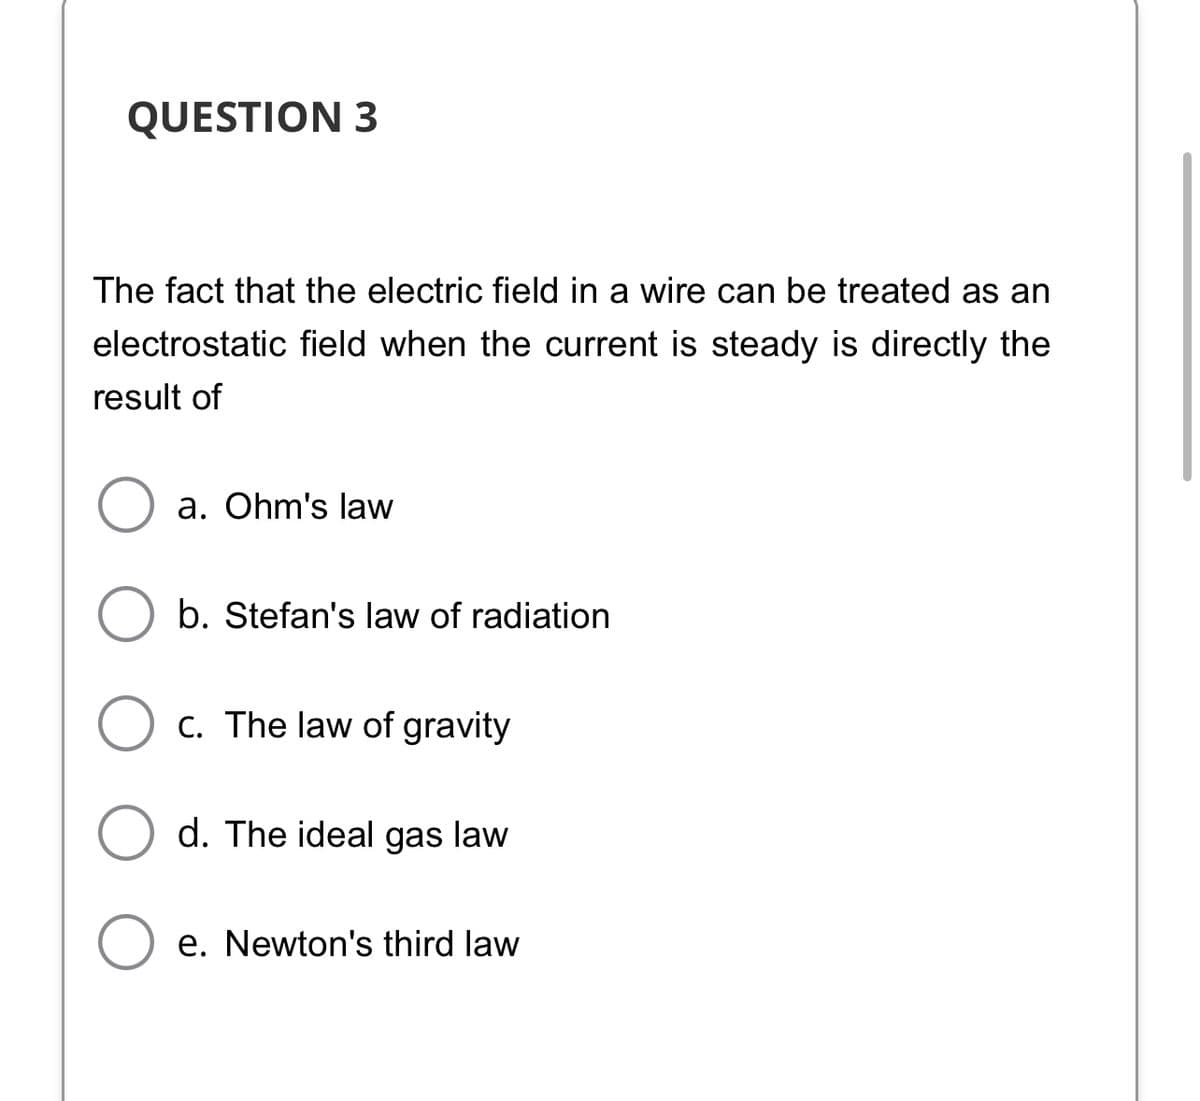 QUESTION 3
The fact that the electric field in a wire can be treated as an
electrostatic field when the current is steady is directly the
result of
a. Ohm's law
b. Stefan's law of radiation
C. The law of gravity
d. The ideal gas law
e. Newton's third law
